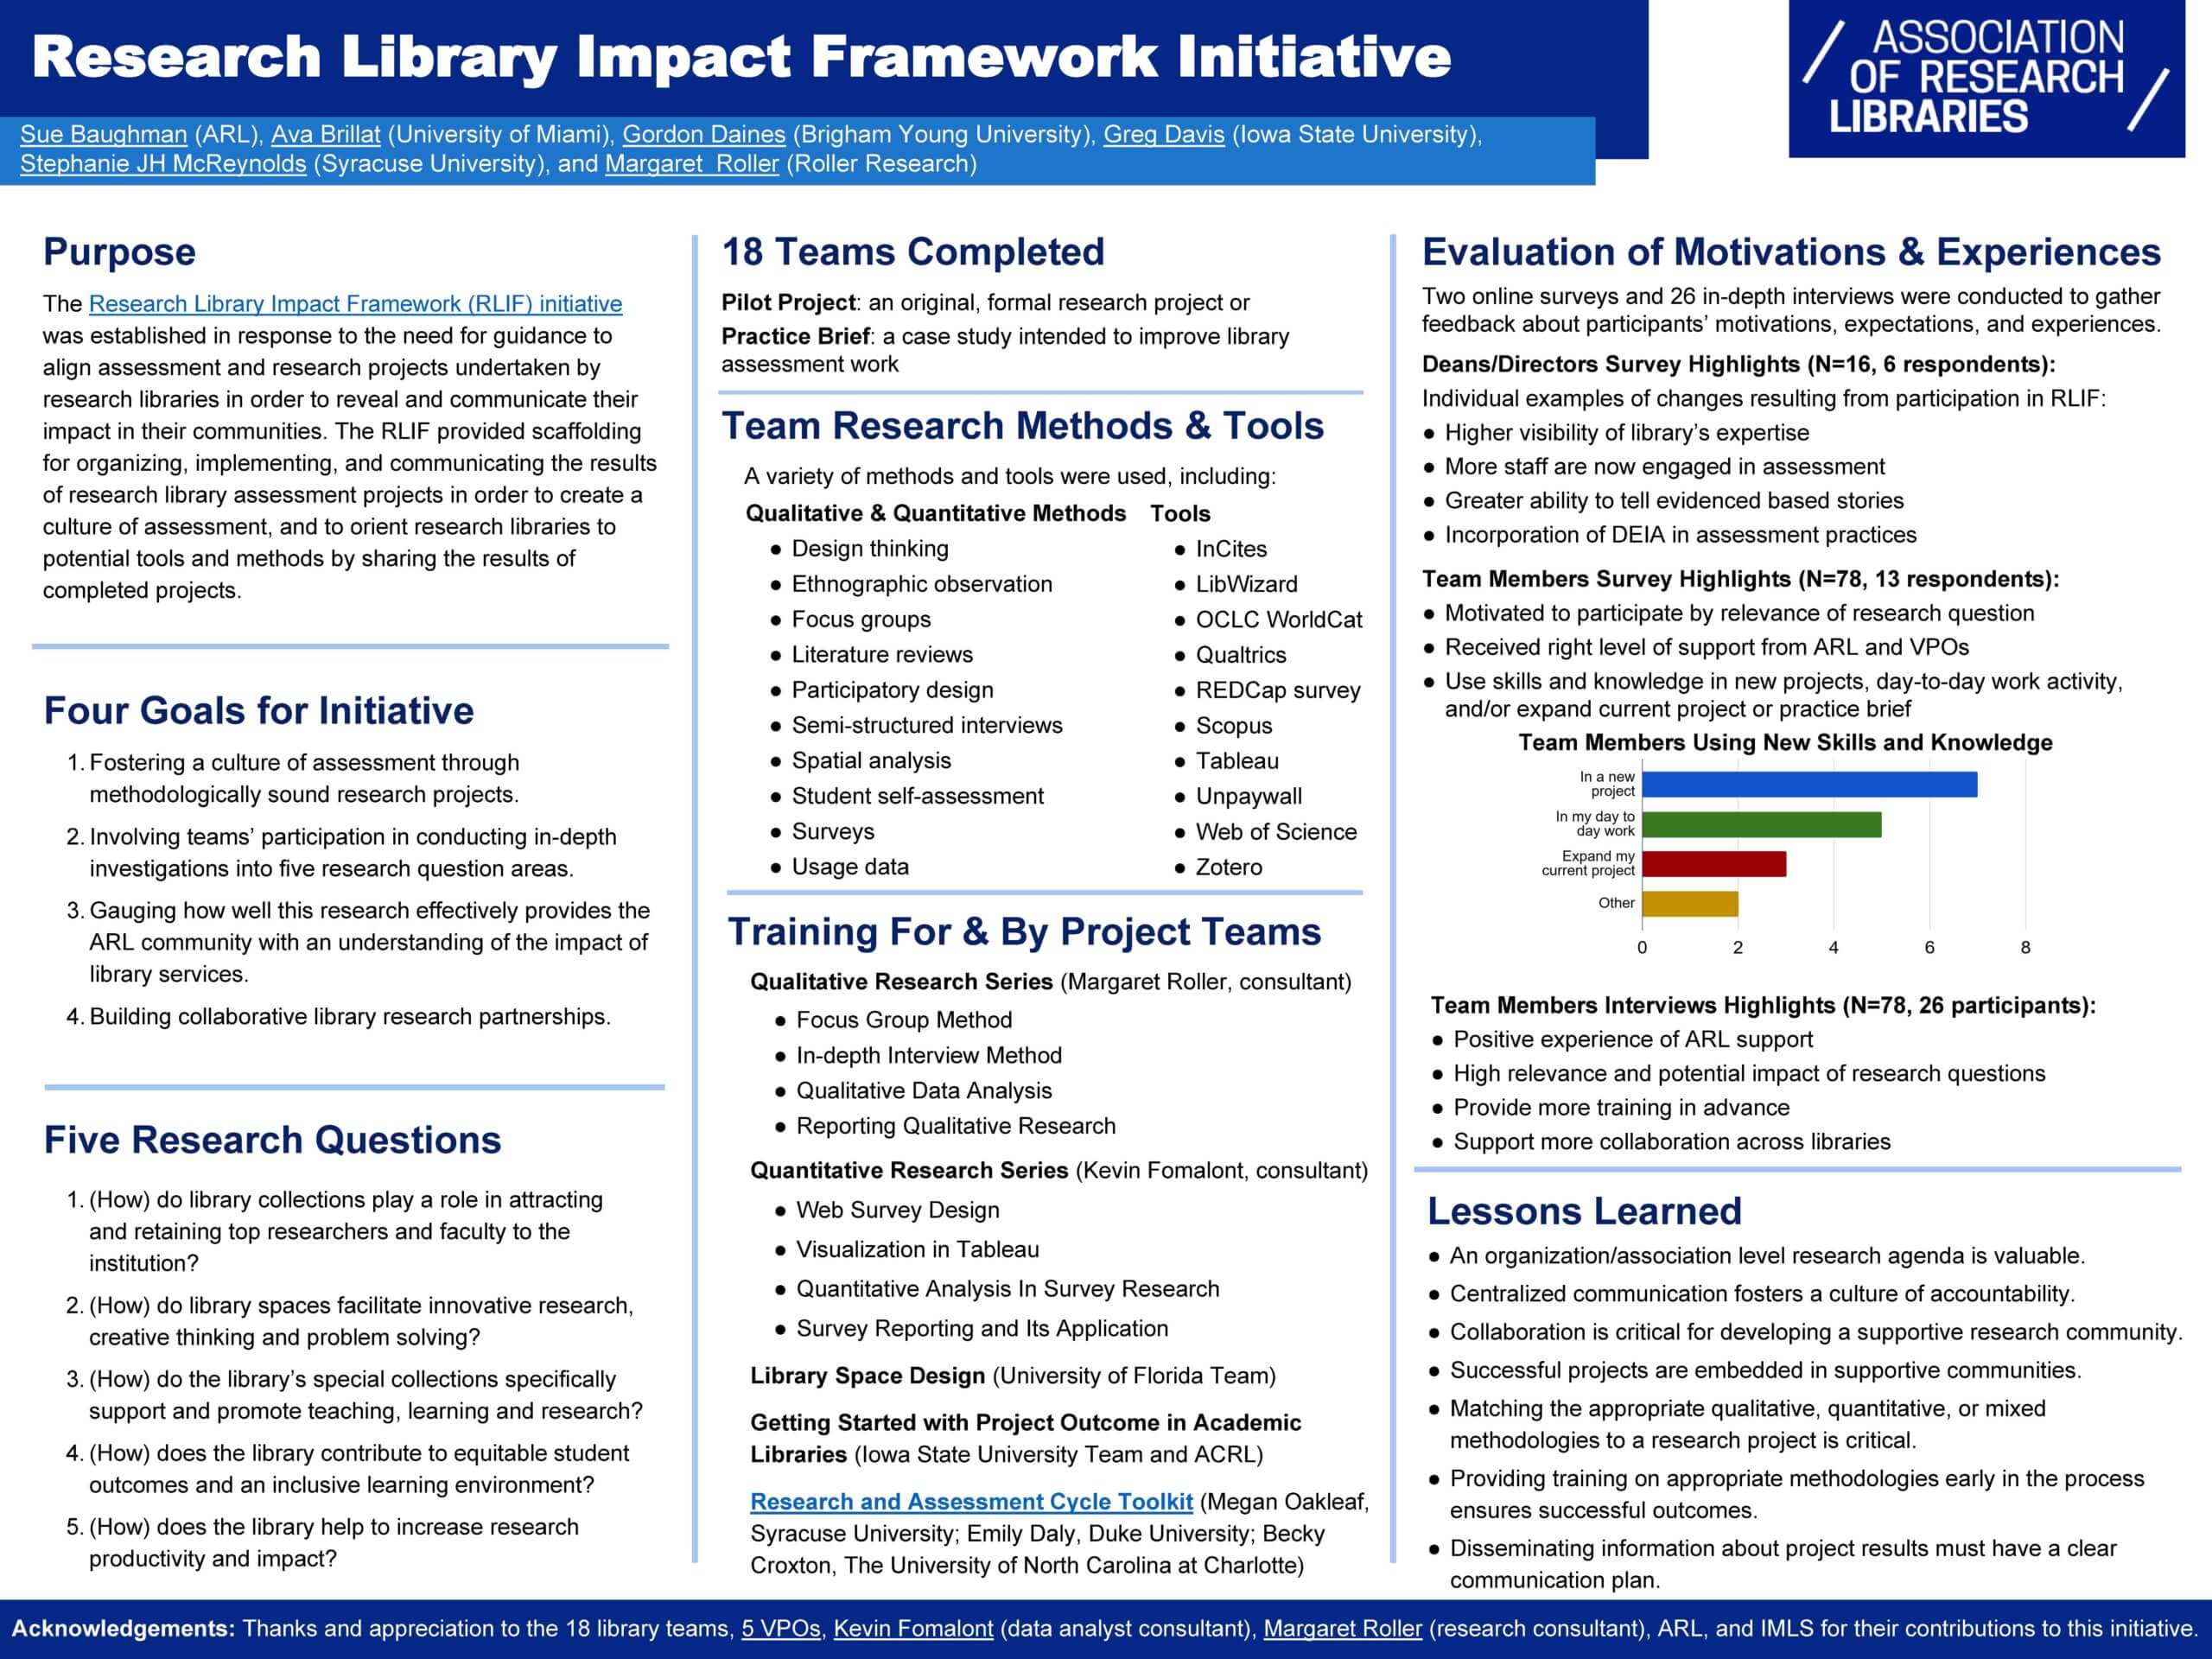 Research Library Impact Framework Initiative poster illustrating purpose, goals, research questions, team research methods and tools, trainings, evaluation, and lessons learned.